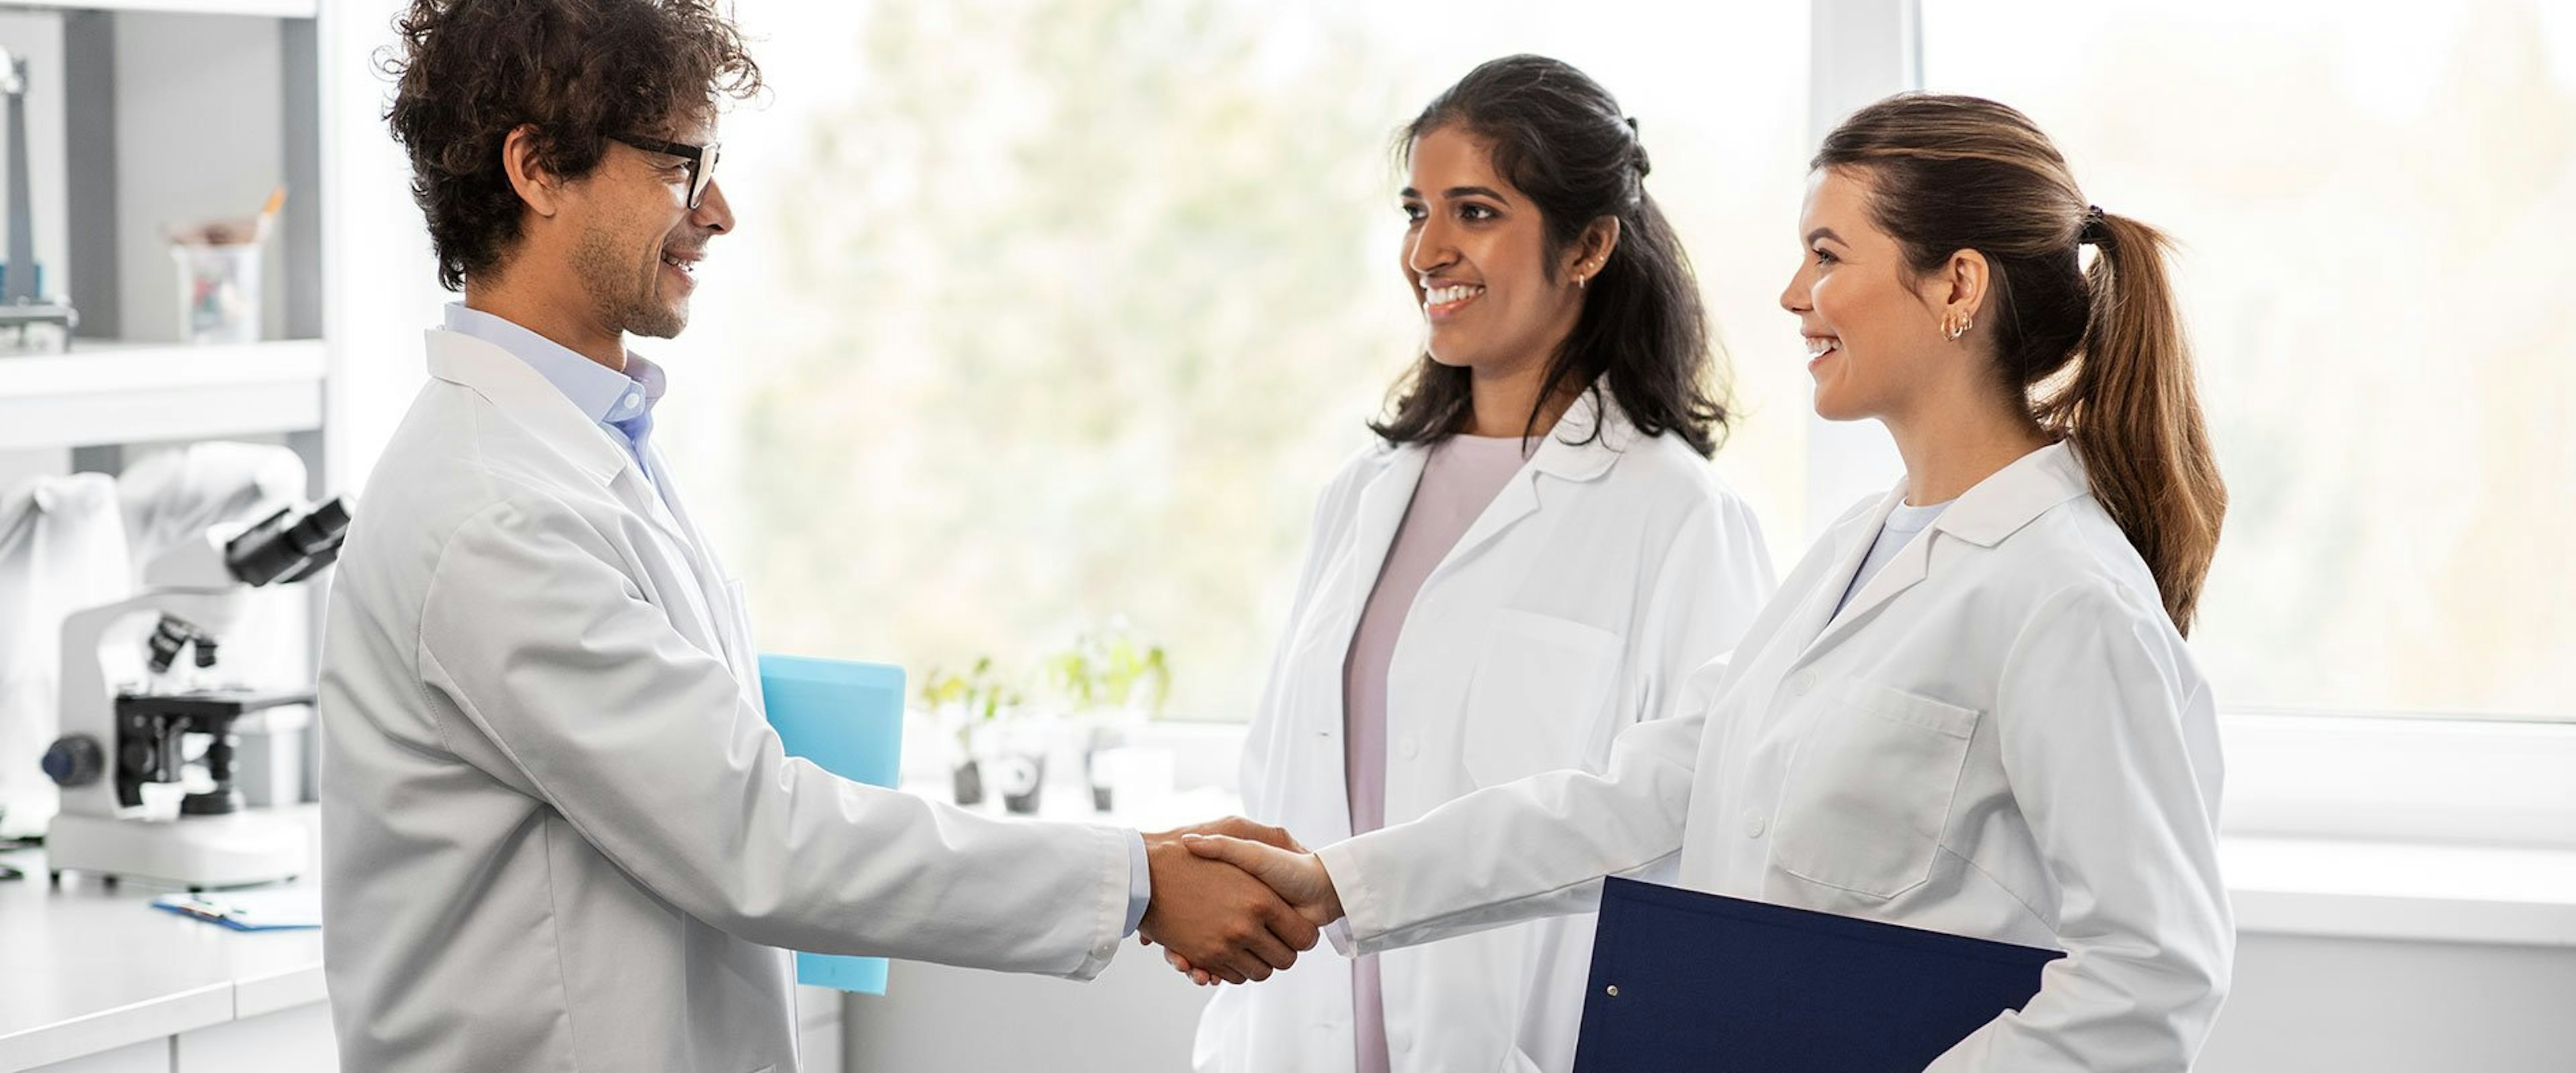 New employee in life science job shaking hands with team member